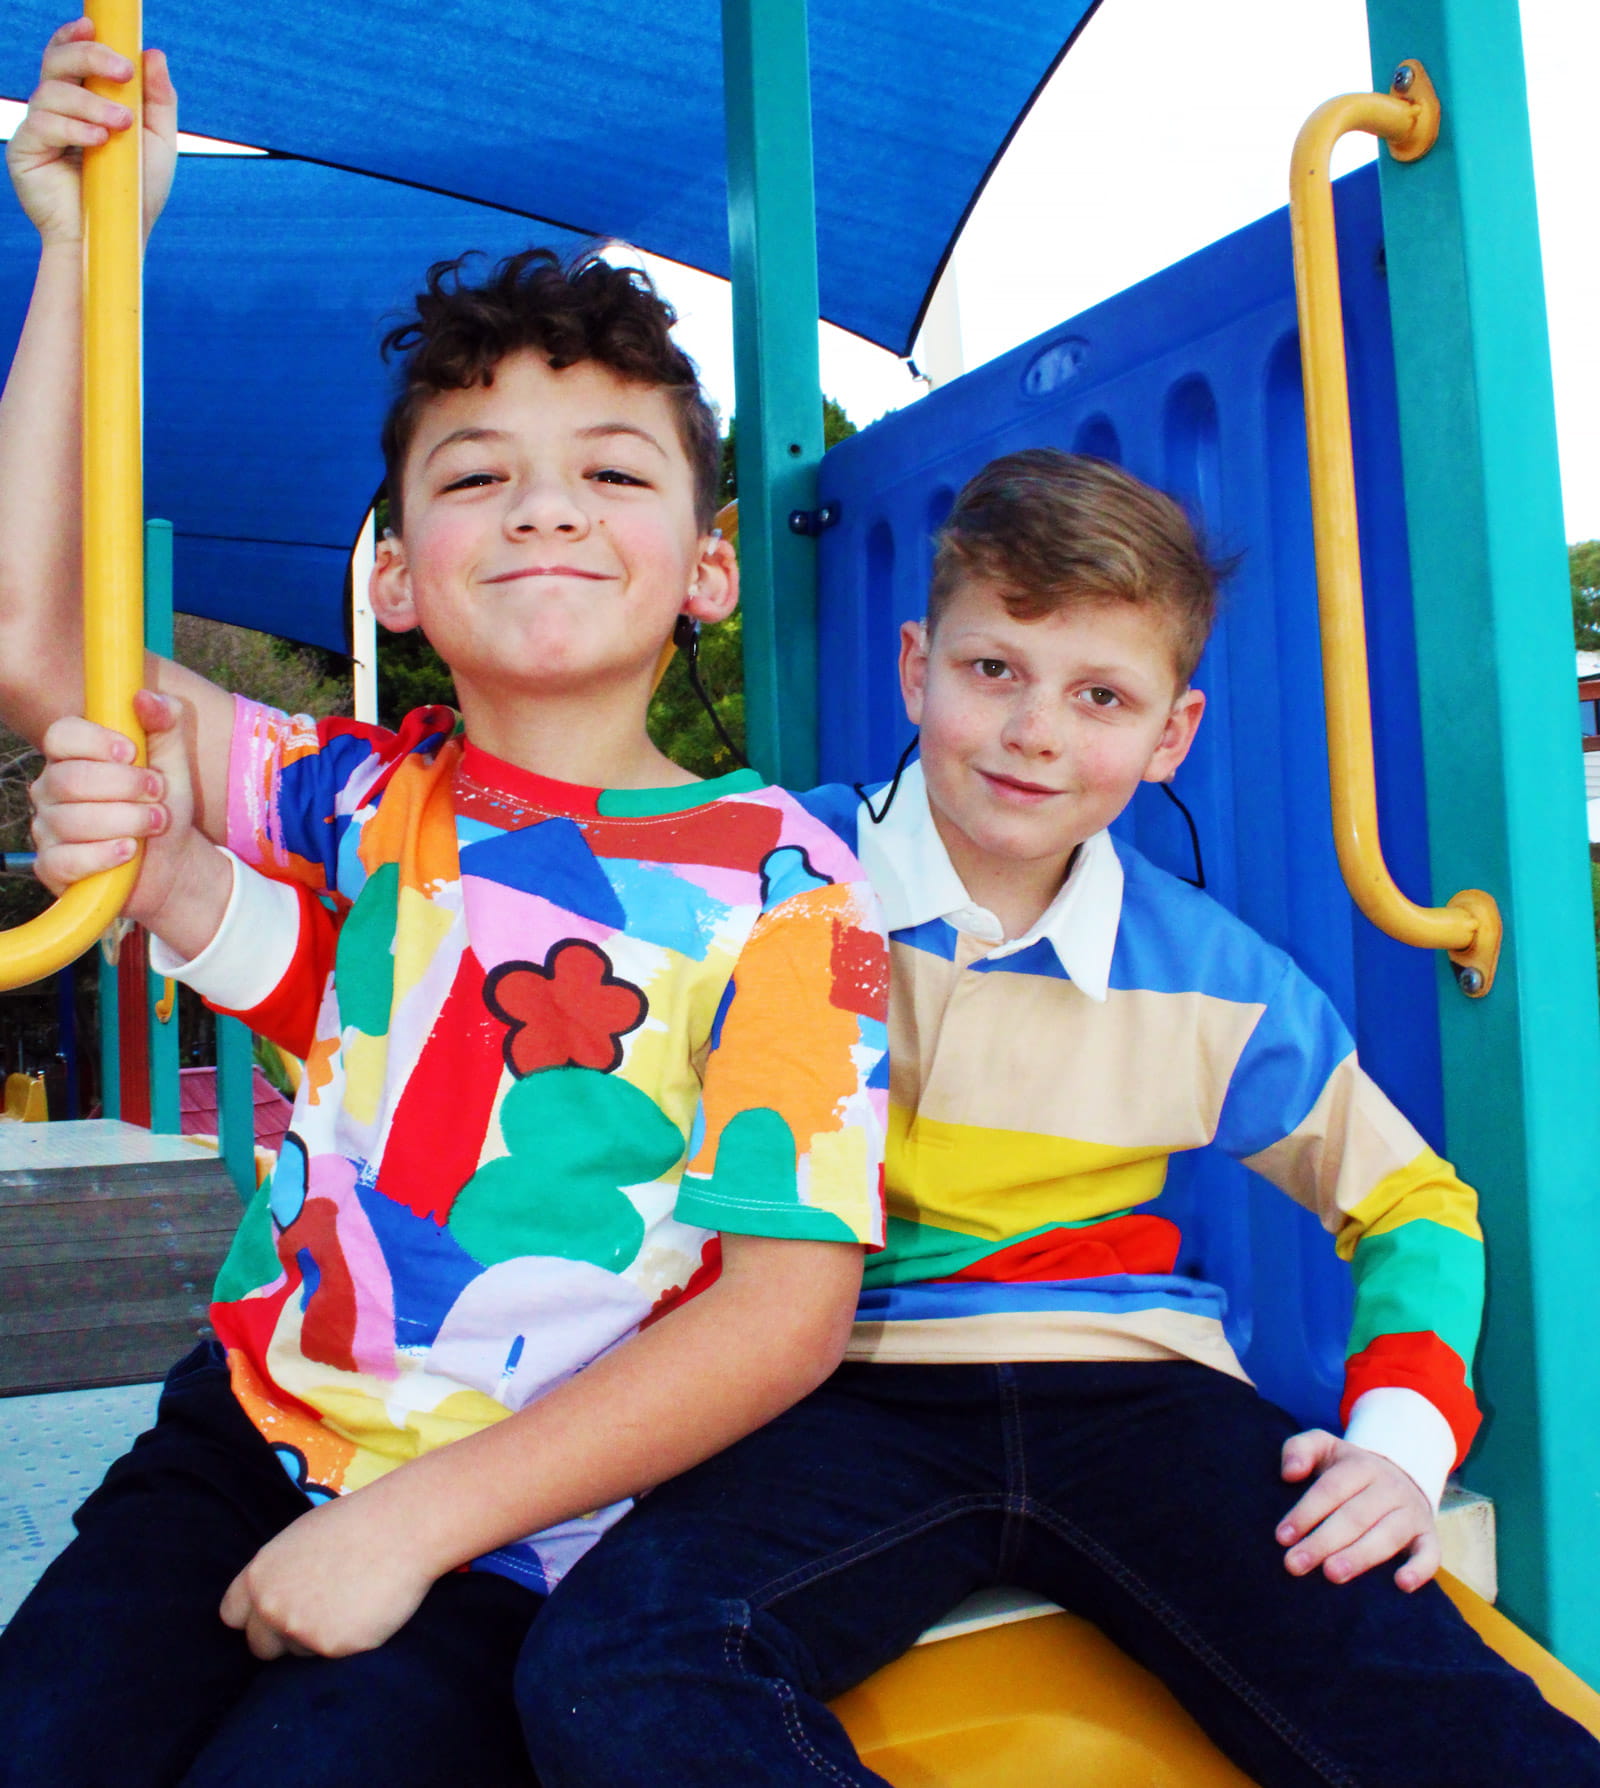 Two kids on a playground wearing loud shirts.